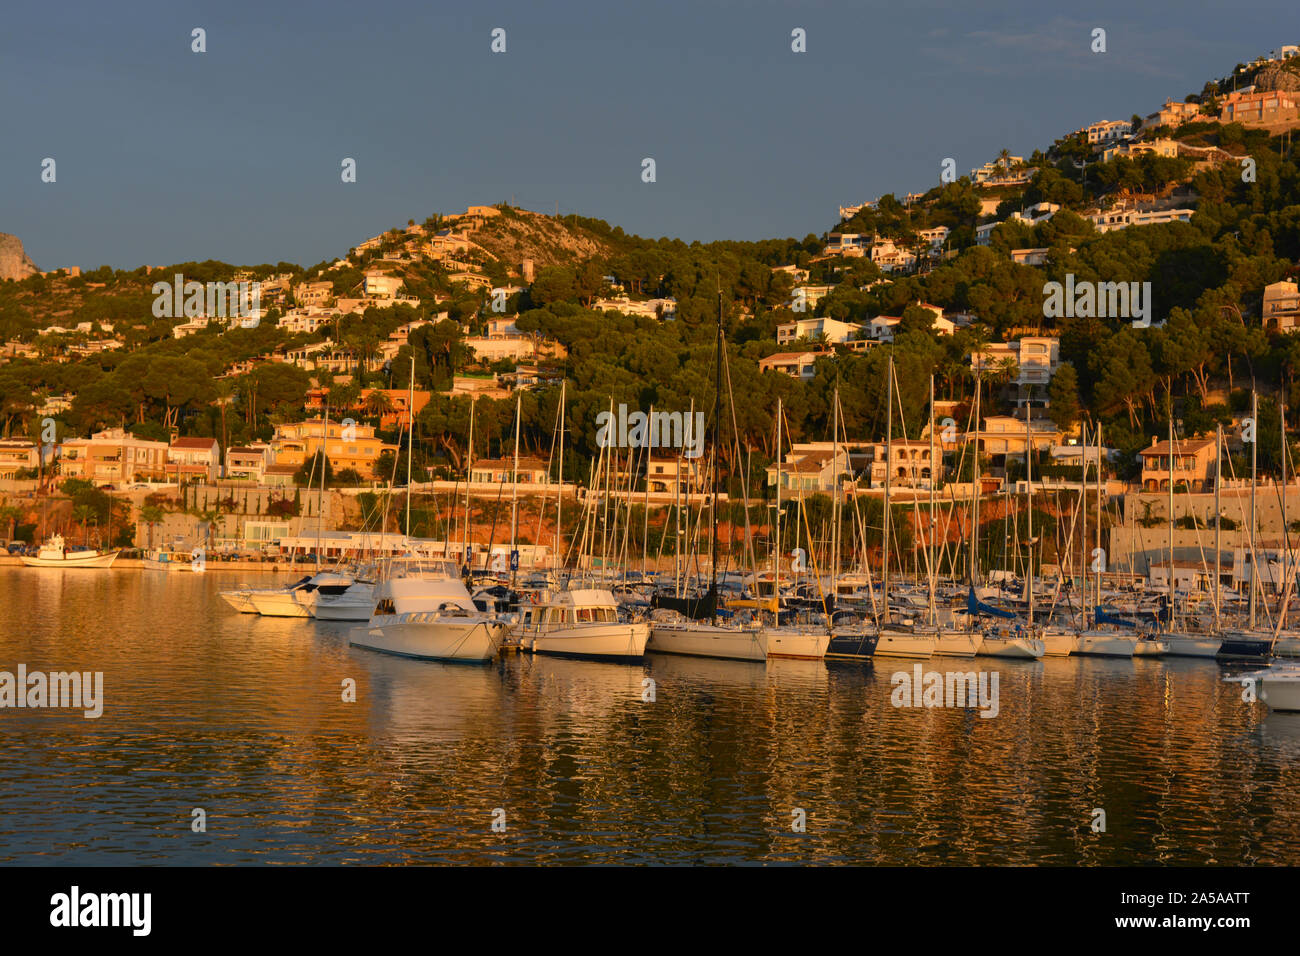 Yachts moored in the marina, early morning light with Montgo mountain in the background, Javea, Xabia, Alicante Province, Valencia, Spain Stock Photo